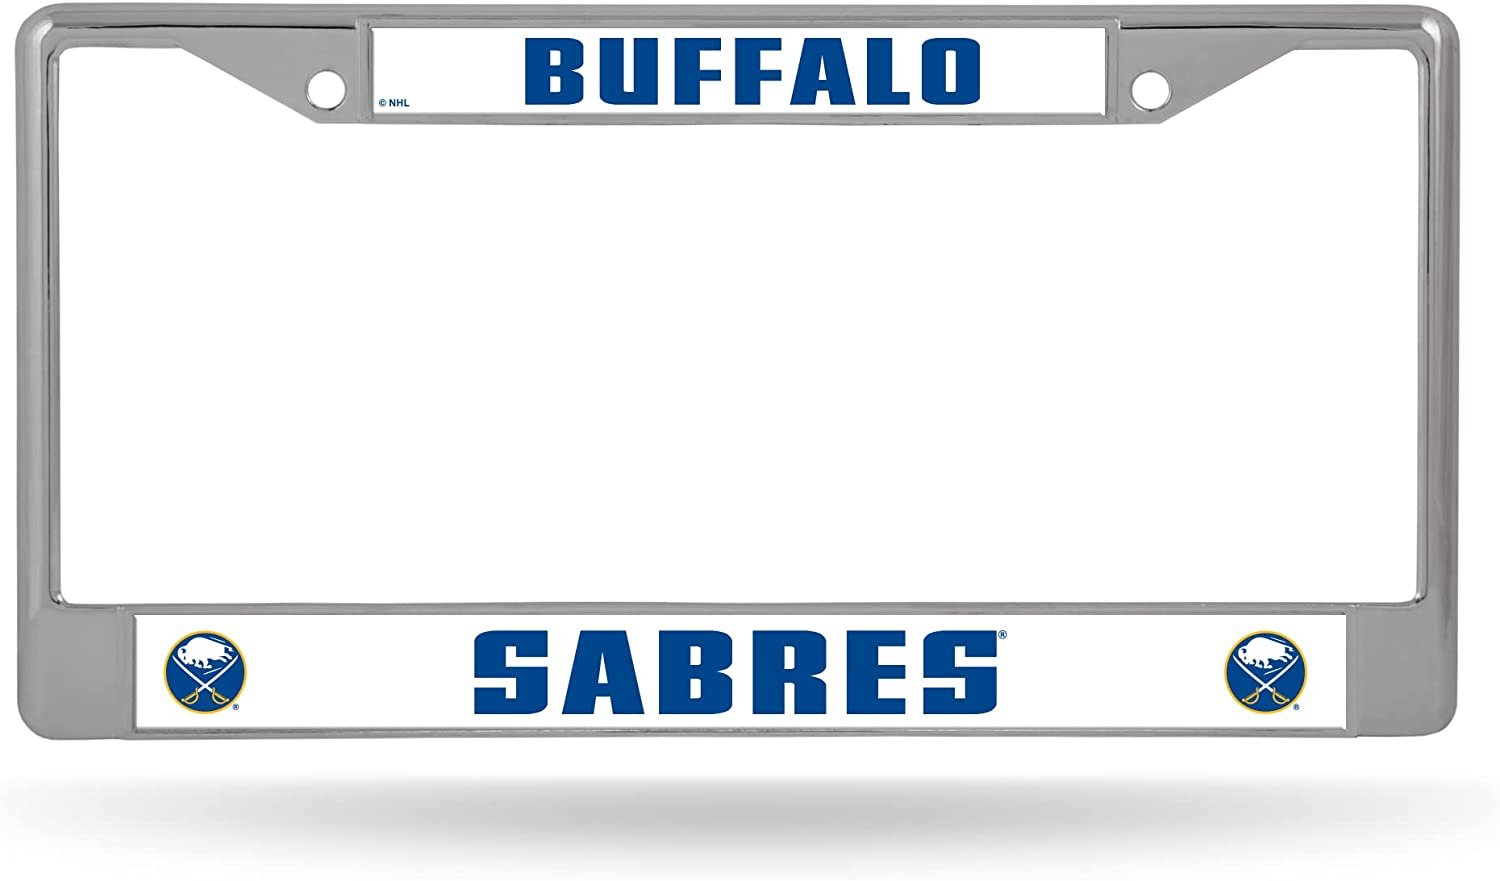 Buffalo Sabres Metal License Plate Frame Chrome Tag Cover 6x12 Inch